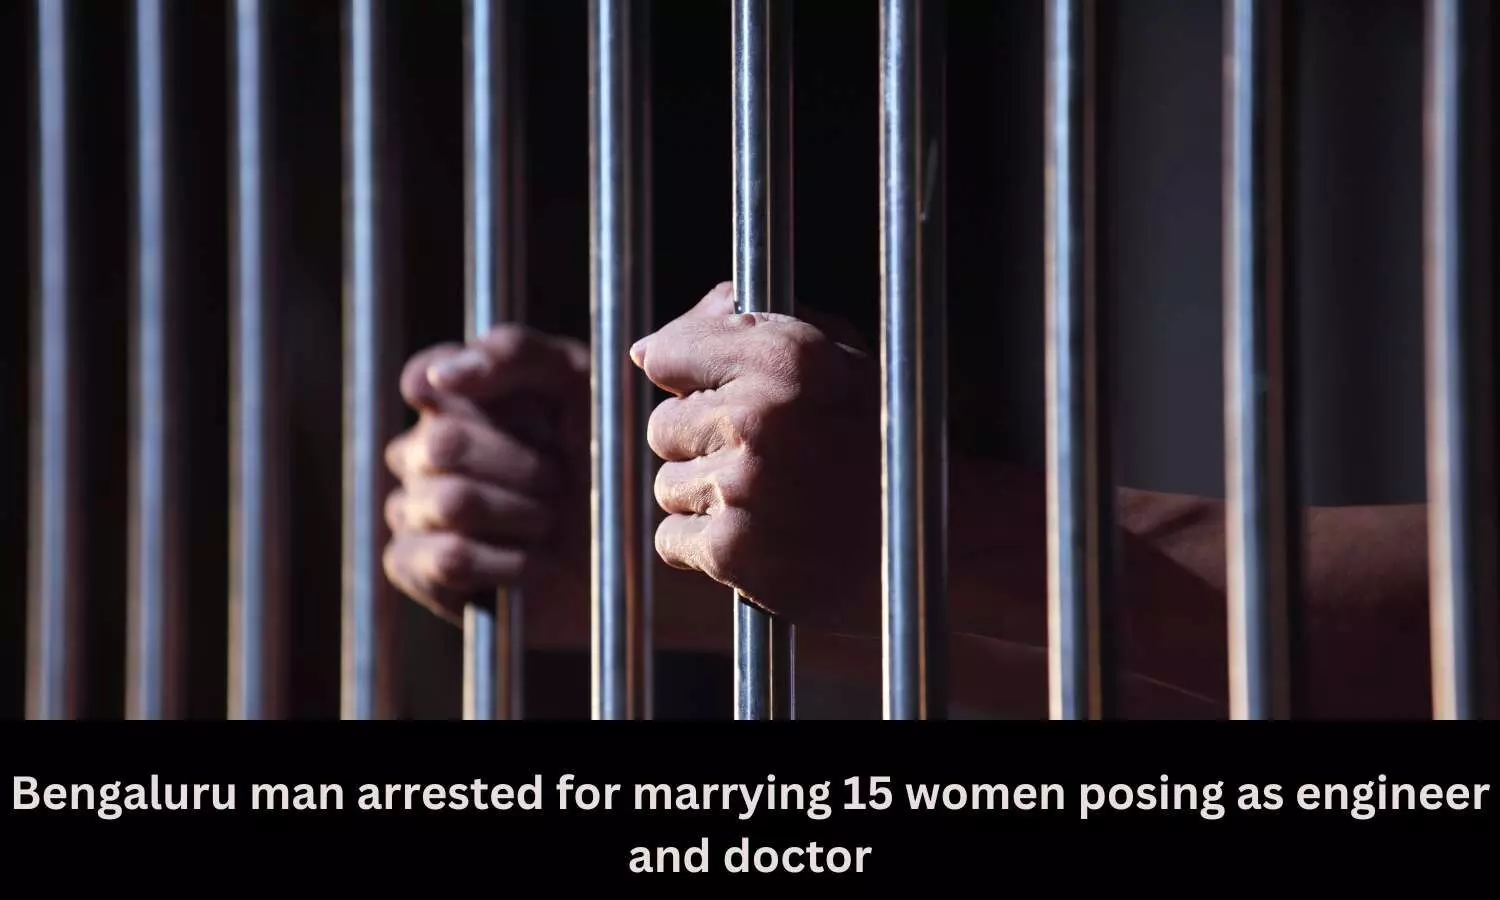 Bengaluru man arrested for marrying 15 women posing as engineer and doctor